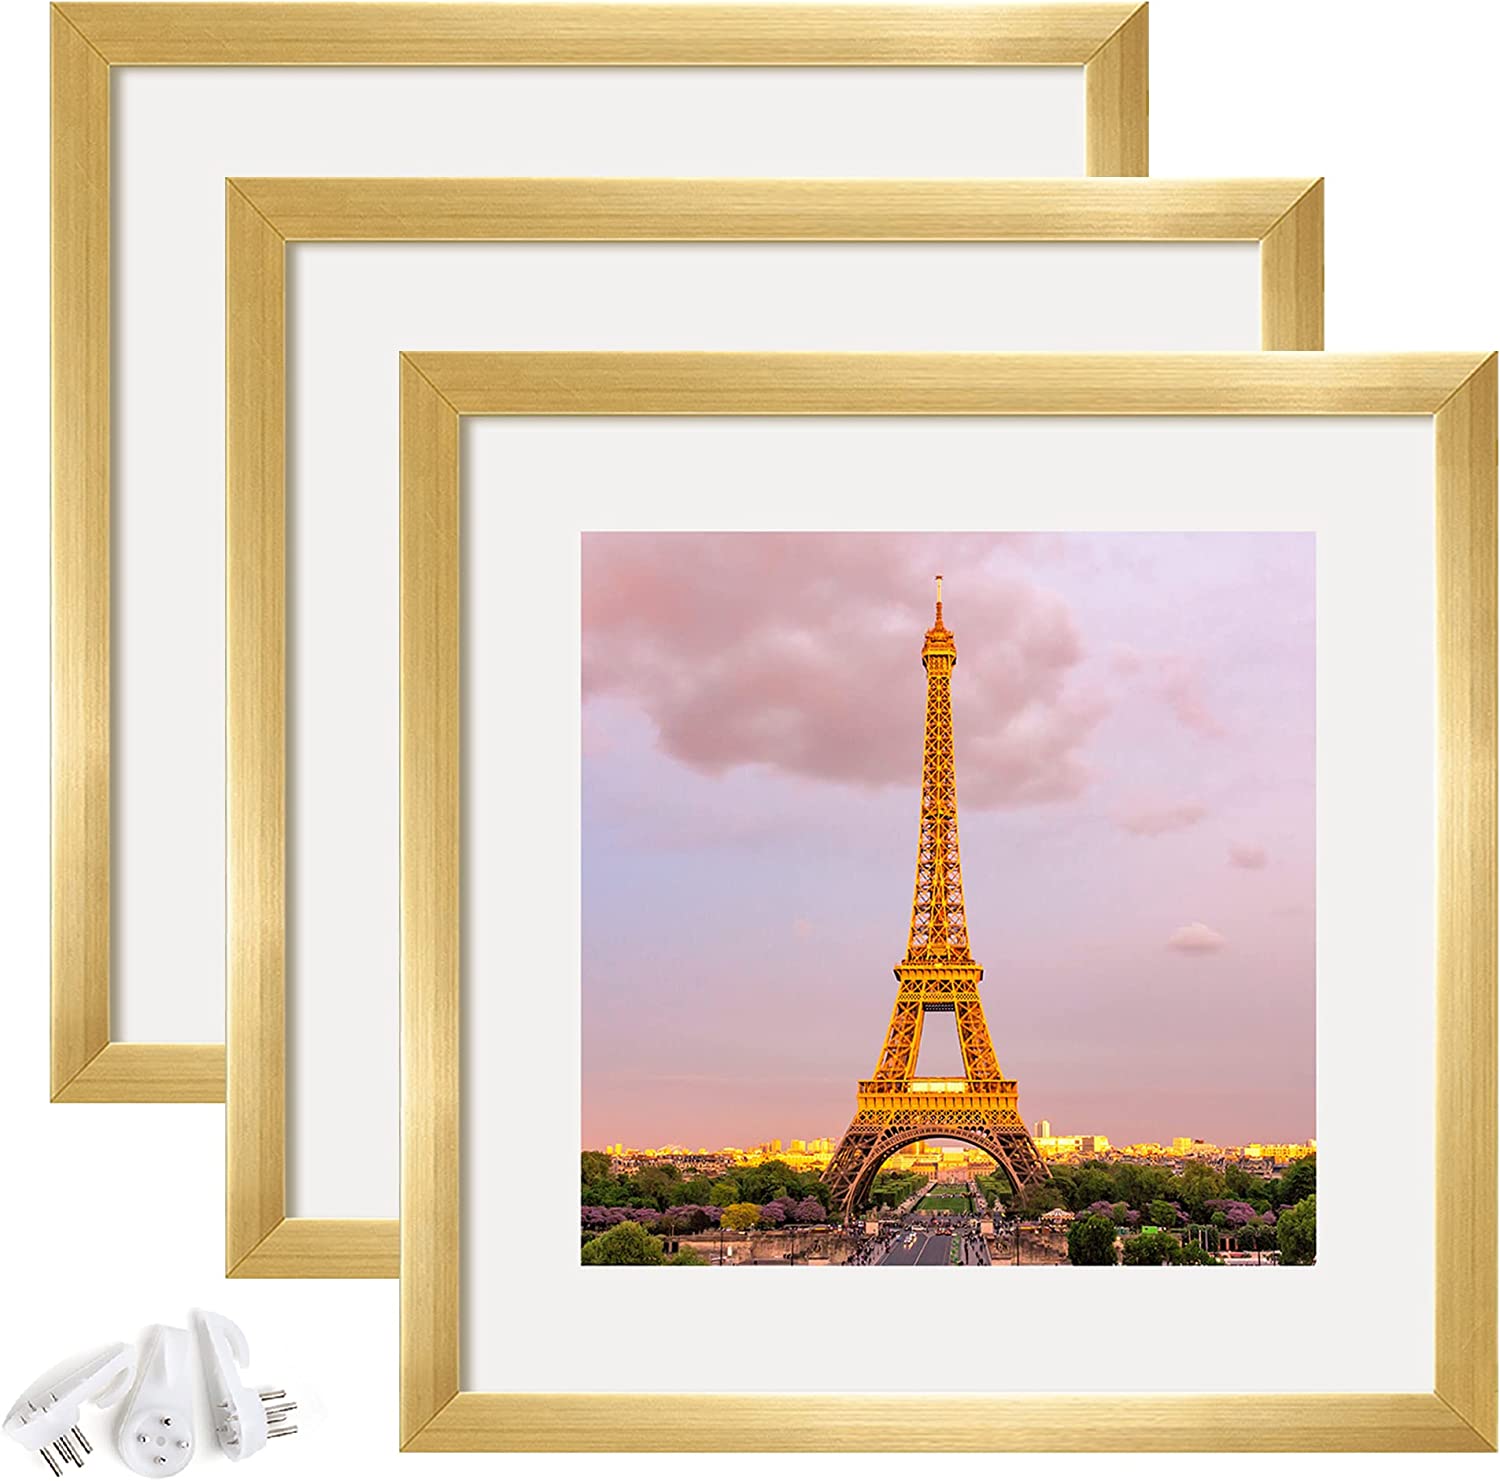 upsimples 8x10 Picture Frame Set of 3, Made of High Definition